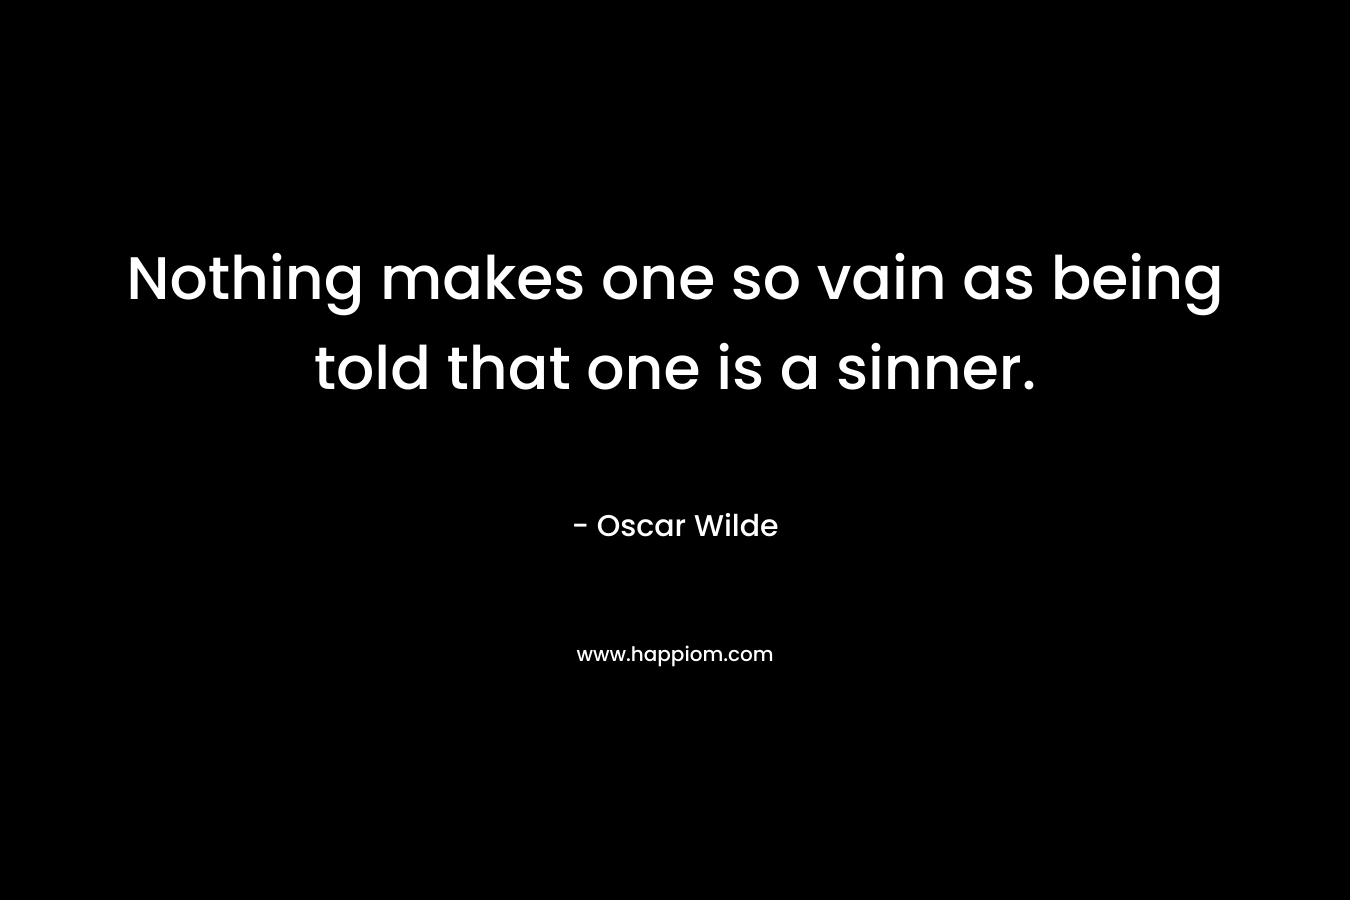 Nothing makes one so vain as being told that one is a sinner.